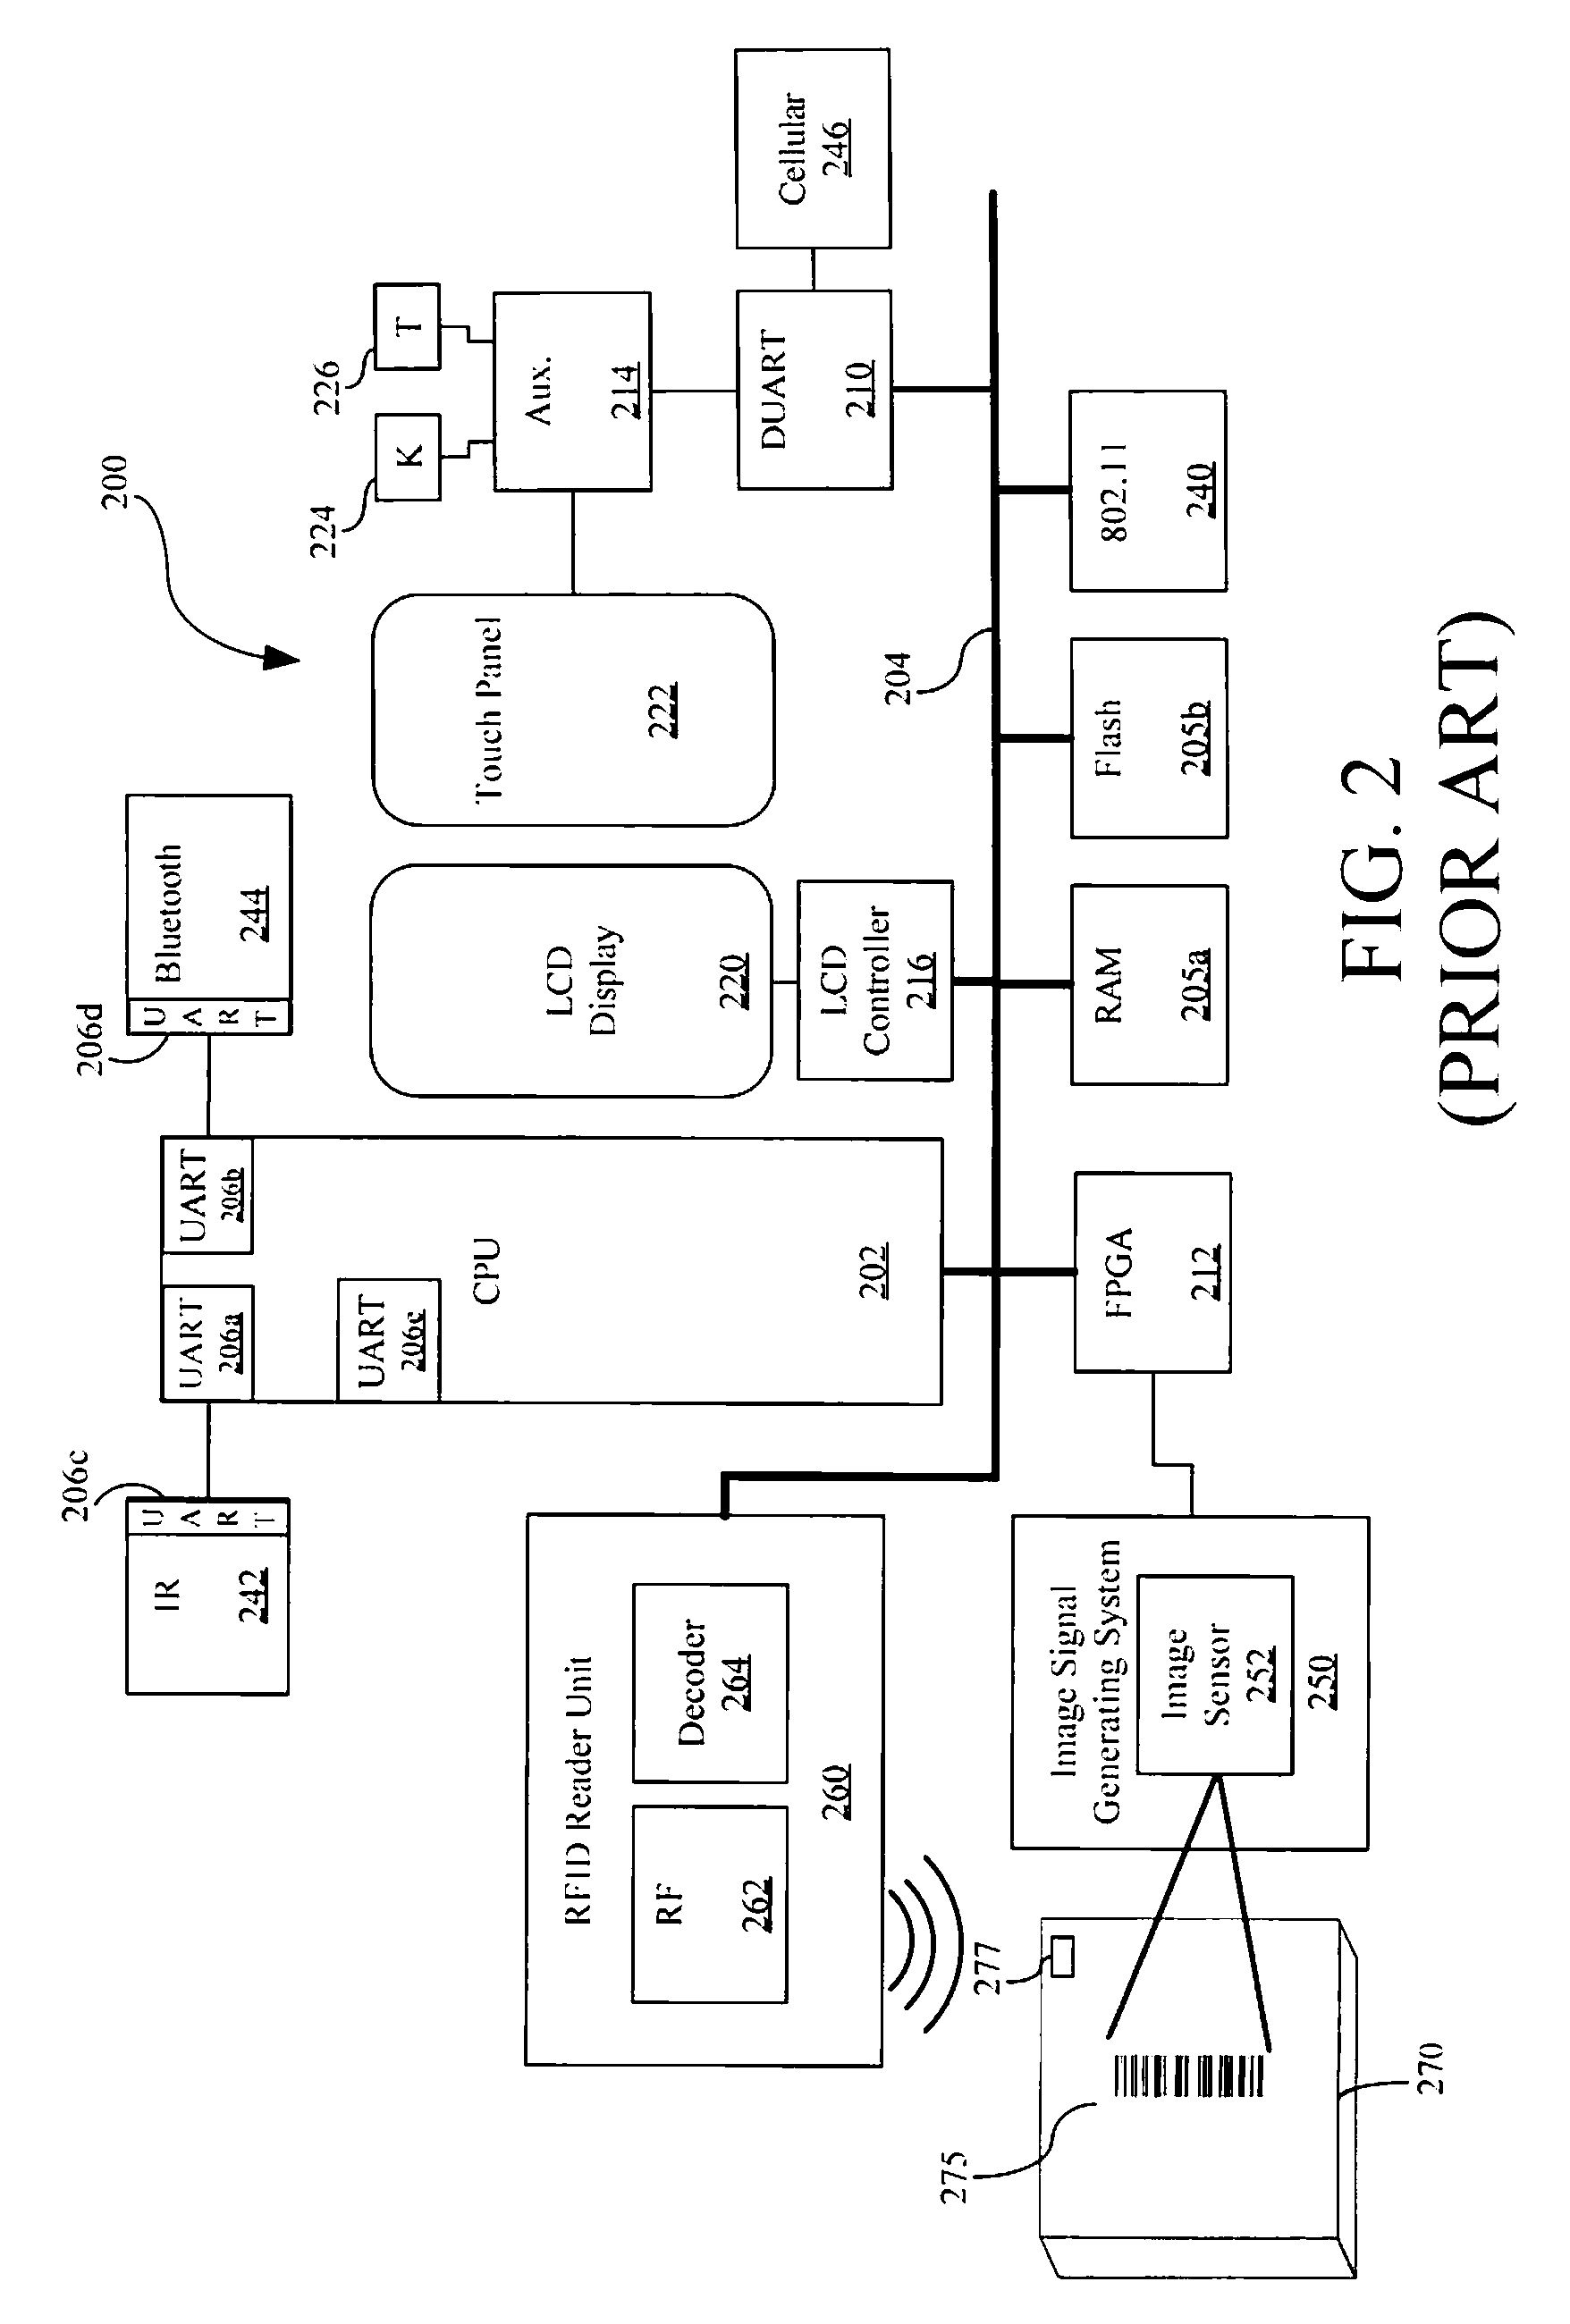 Power management apparatus and methods for portable data terminals